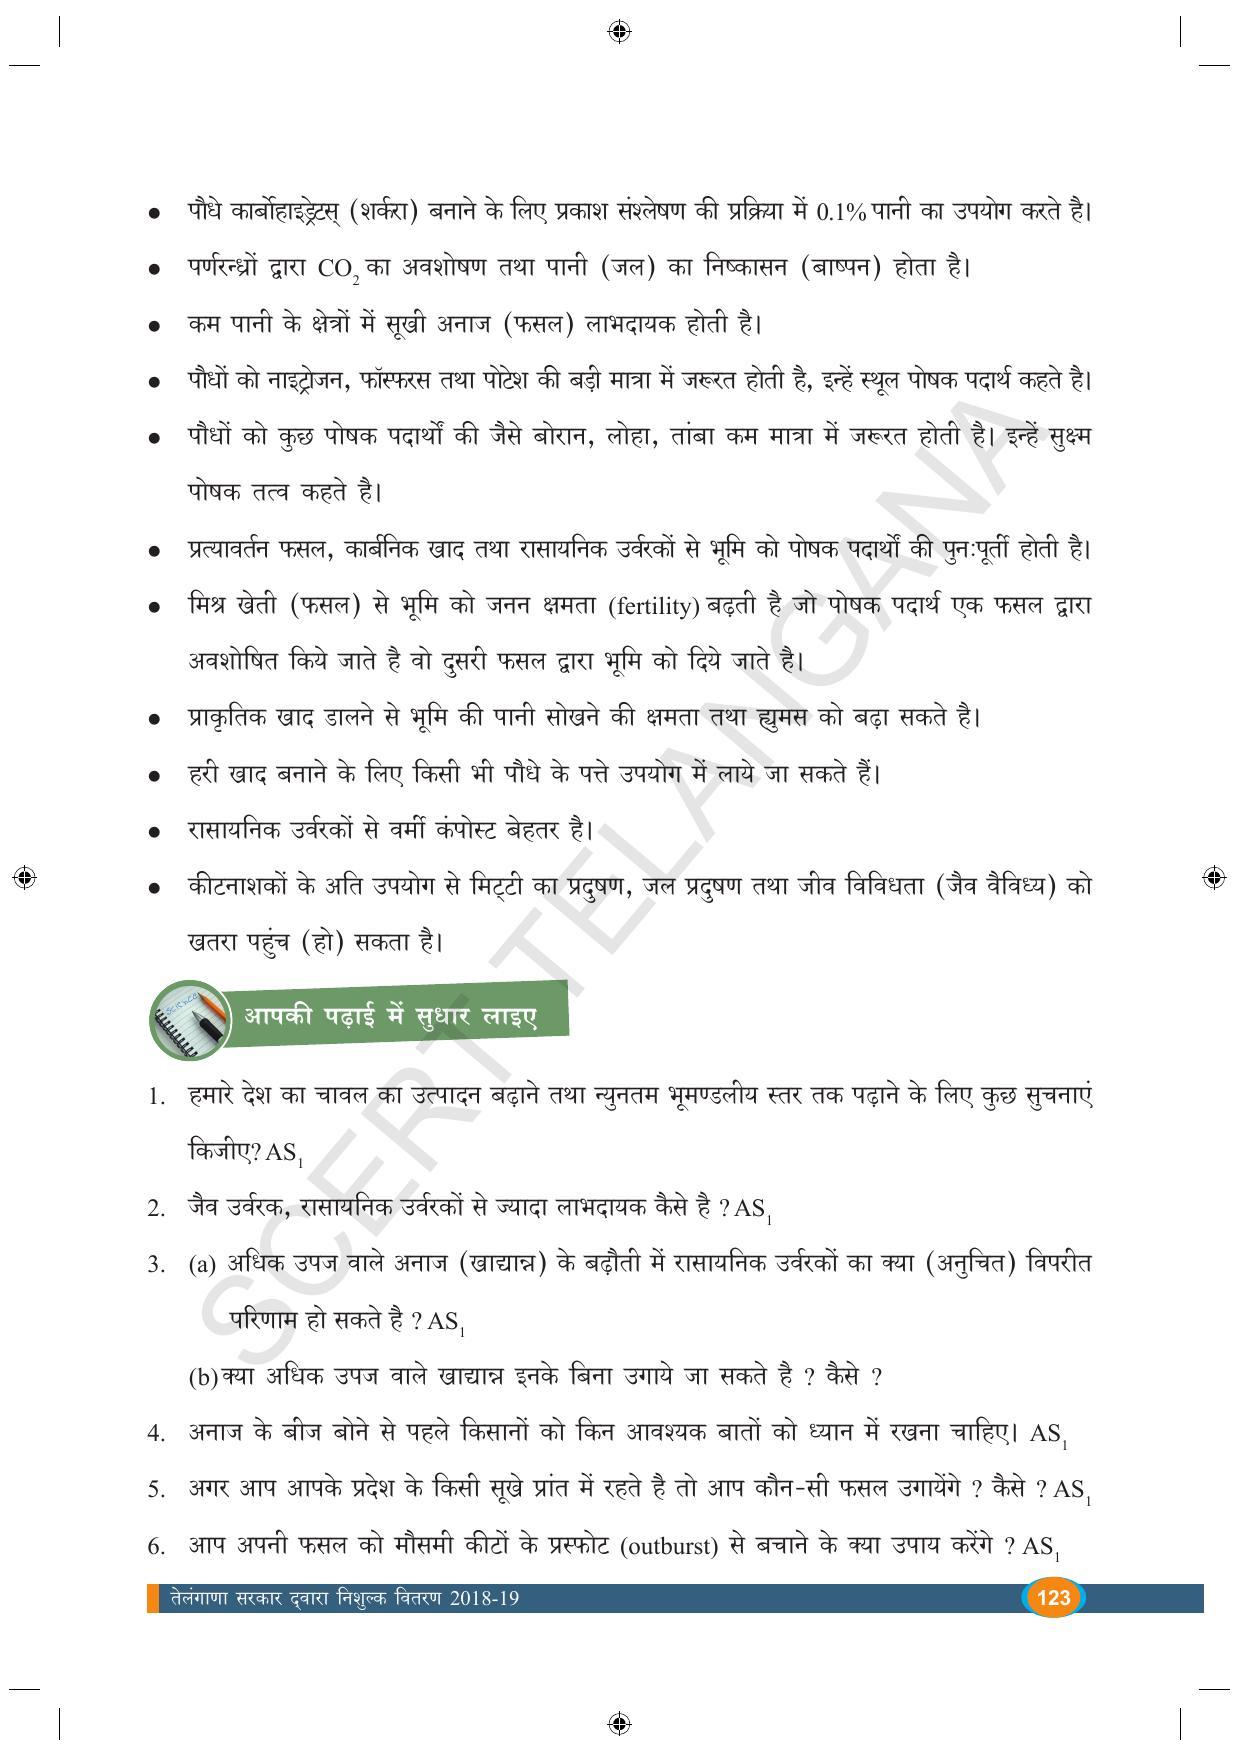 TS SCERT Class 9 Biological Science (Hindi Medium) Text Book - Page 135